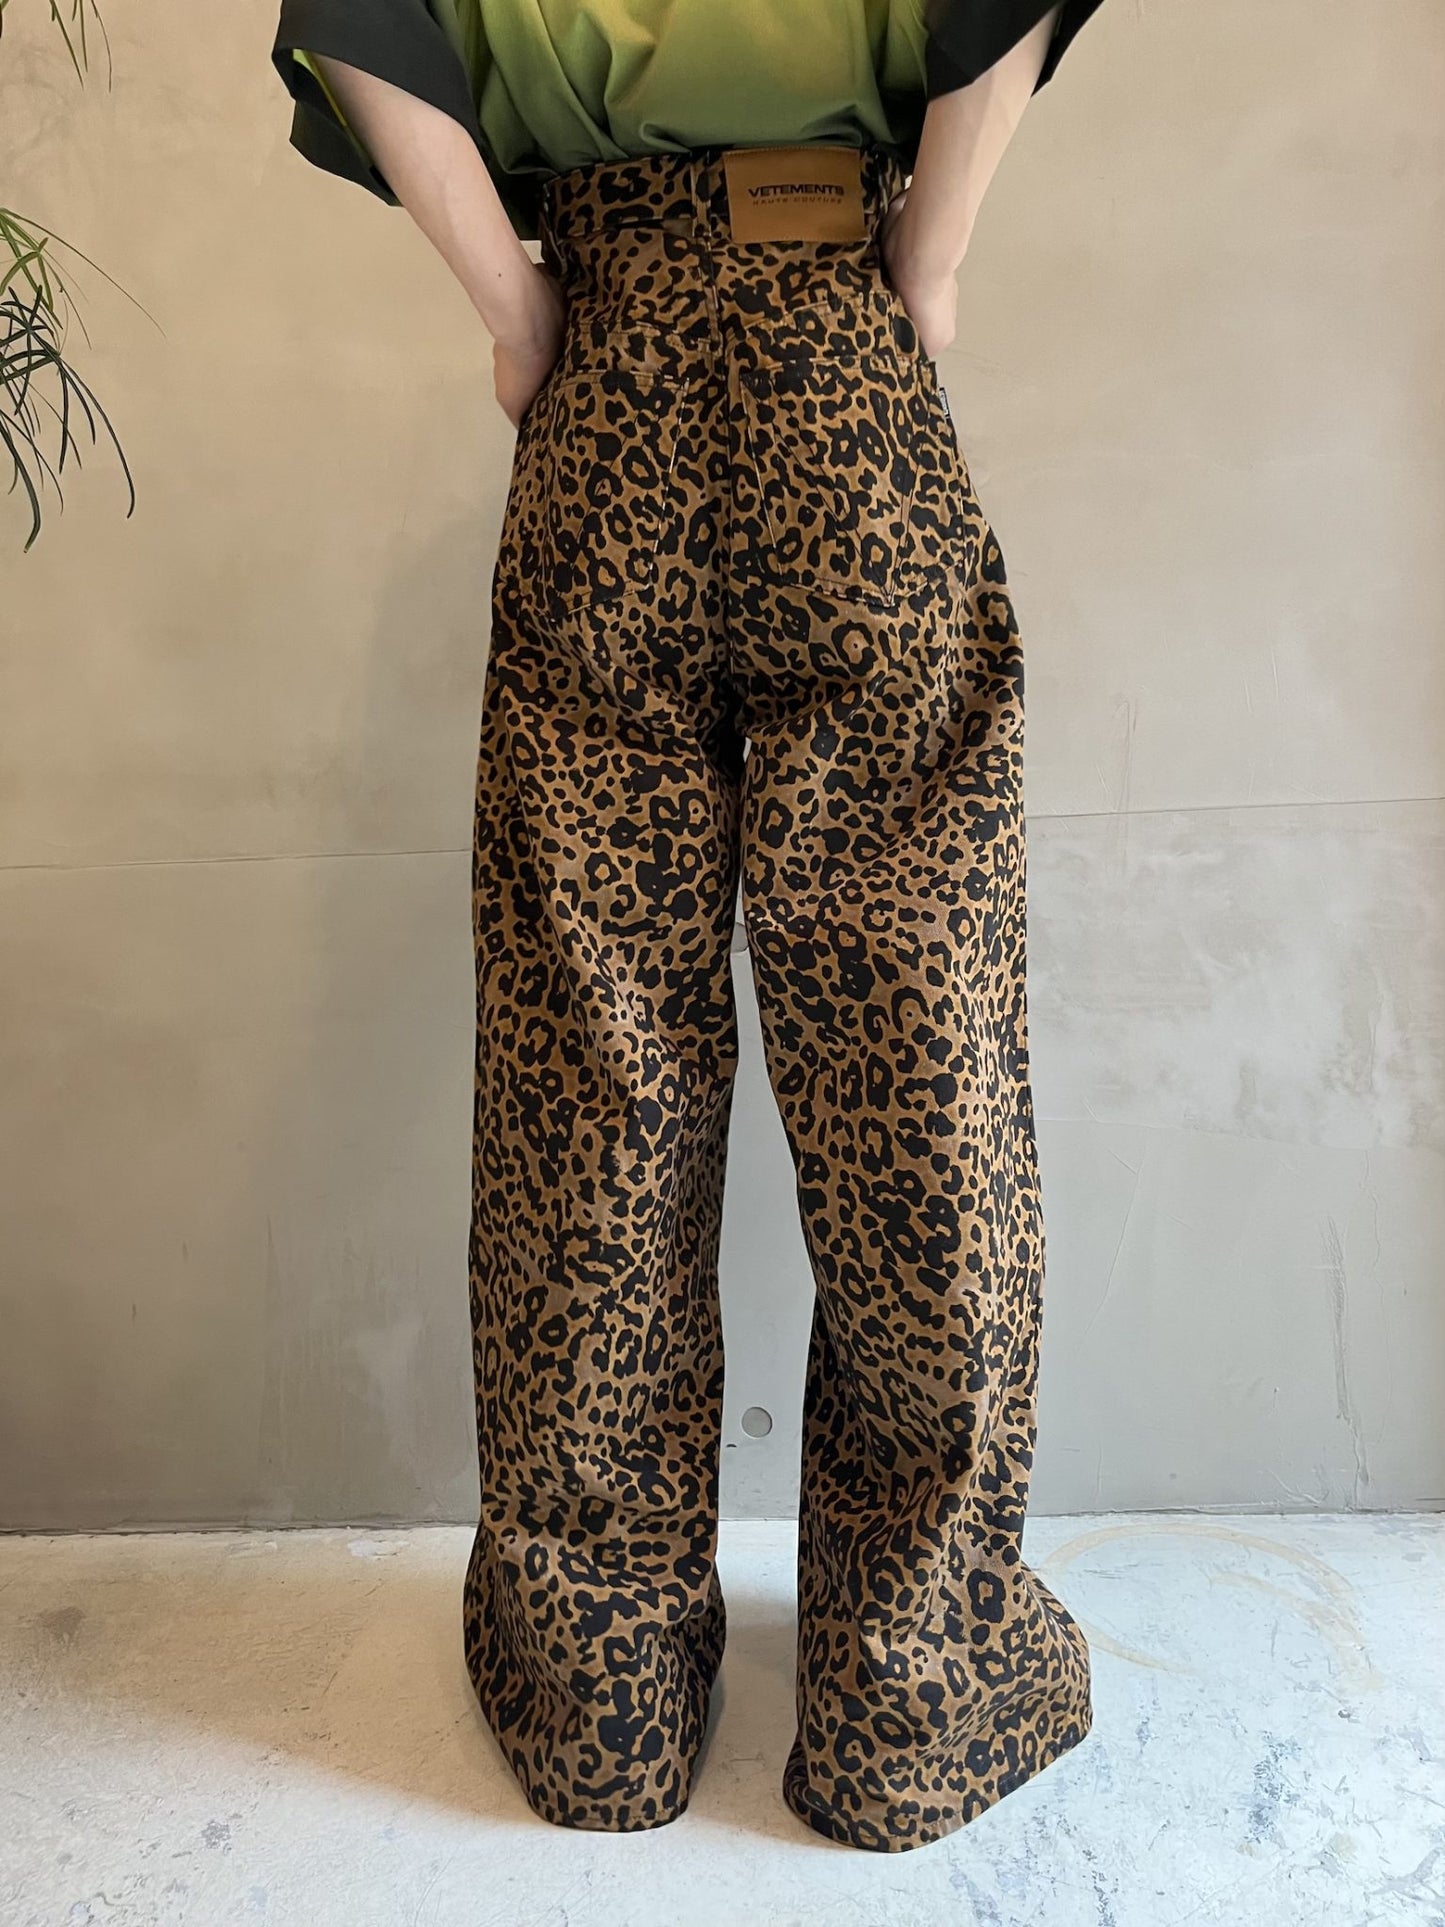 LEOPARD PRINTED BAGGY JEANS【23AW】